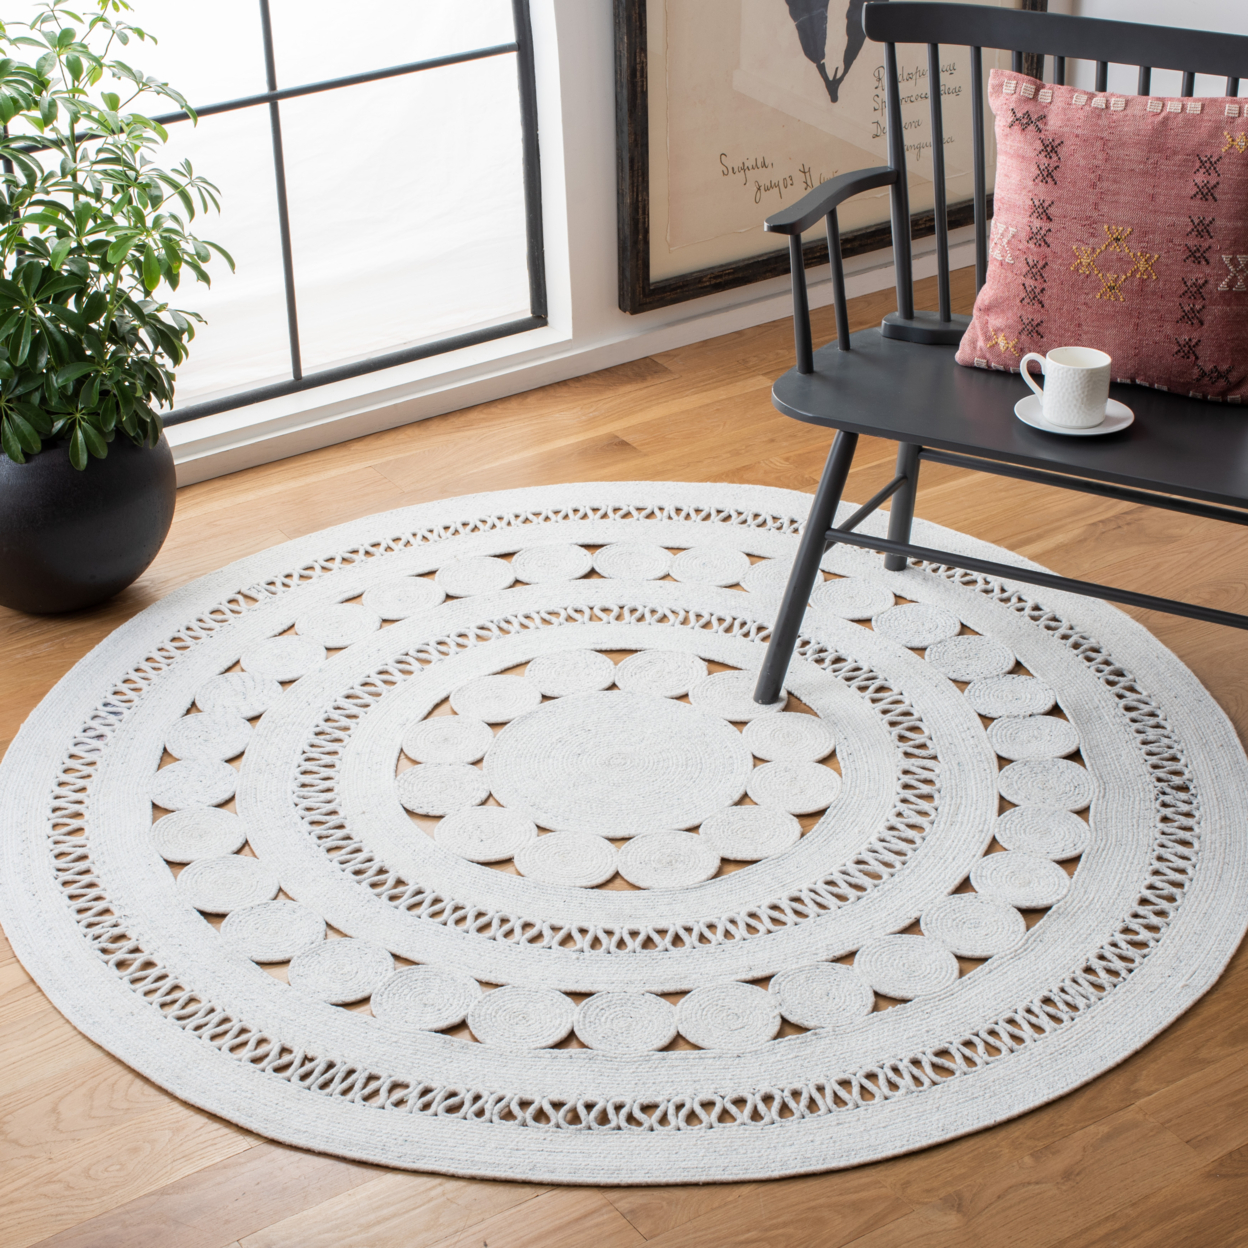 SAFAVIEH Cape Cod Collection CAP222A Handwoven Ivory Rug - 6' Round